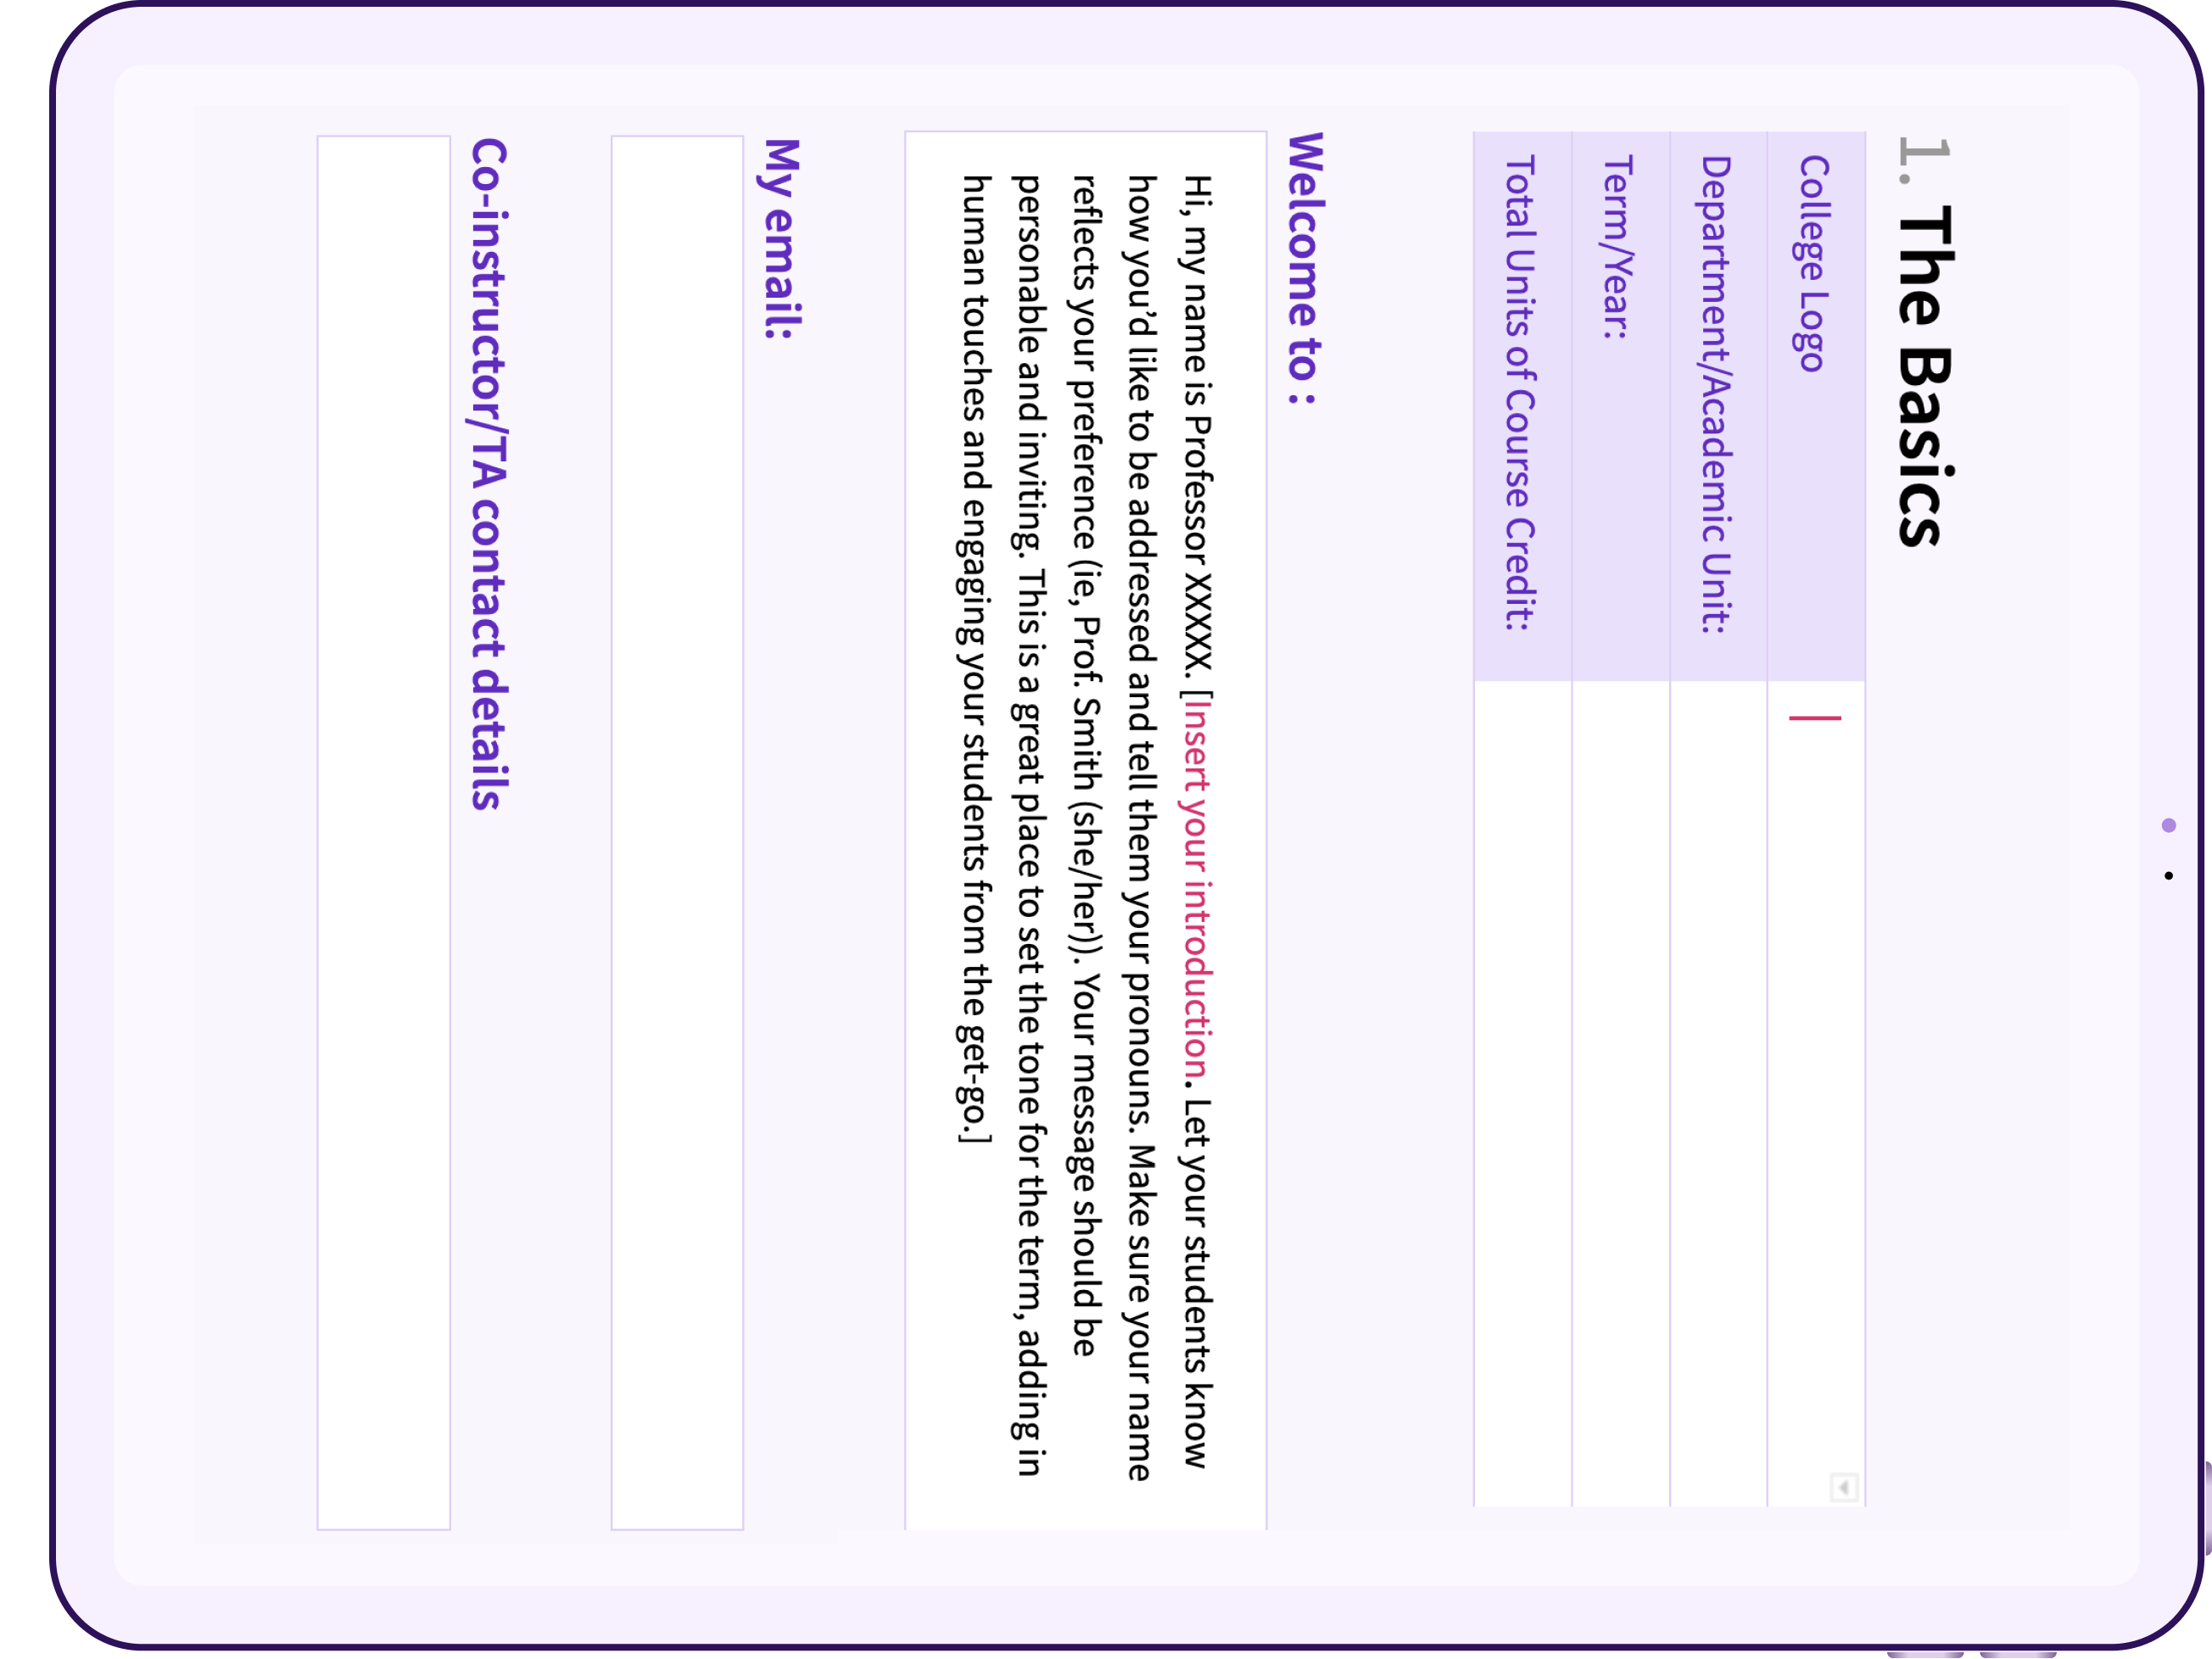 A free syllabus template for college courses displayed on an iPad